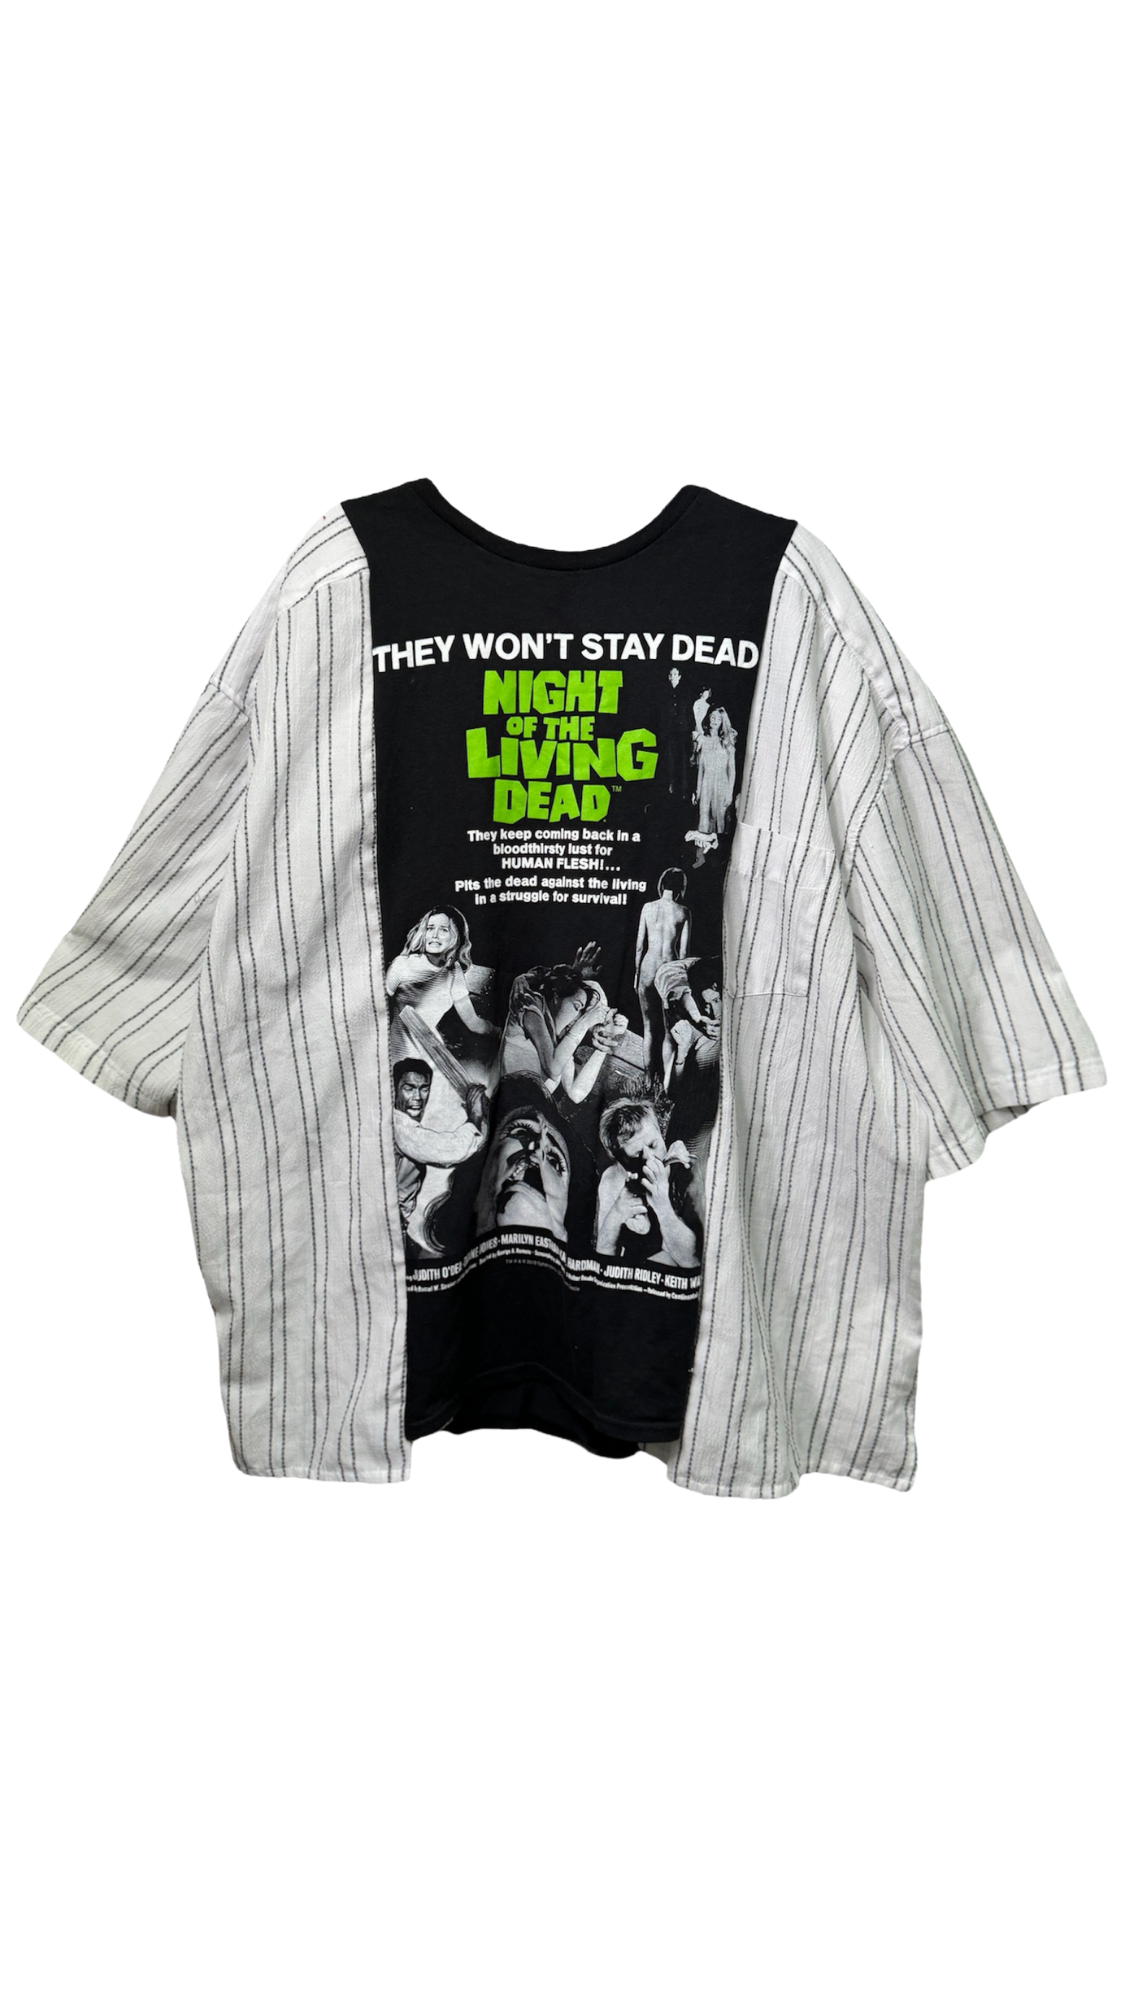 2 in 1 Tee The Living Dead